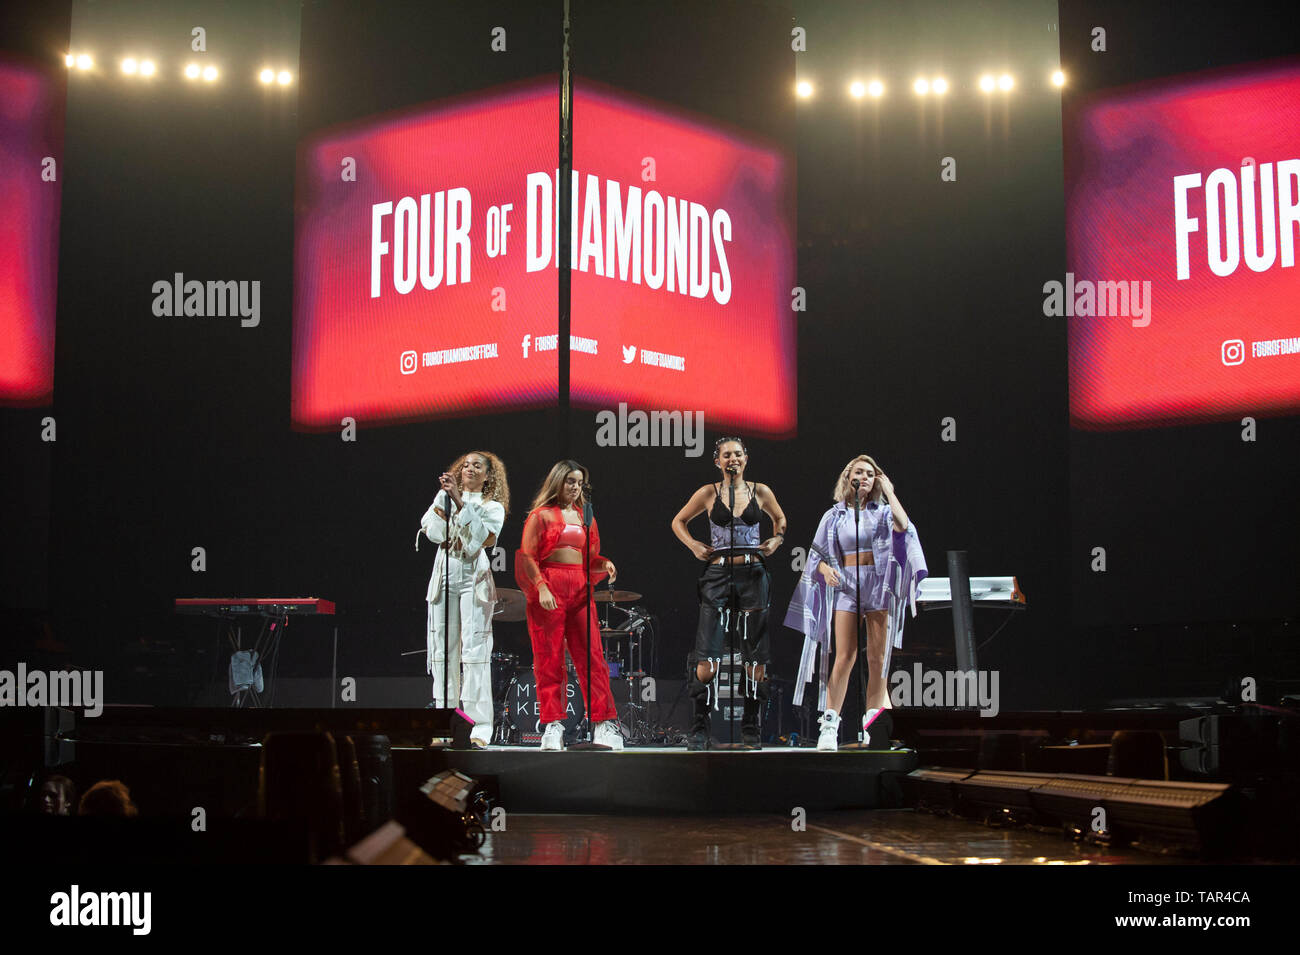 Liverpool, UK. 27th May 2019.  British girl group, and former X Factor contestants, Four of Diamonds, perform as support for Rita Ora during her ‘Phoenix’ tour, at the Liverpool M&S Bank Arena. Credit: Paul Warburton/Alamy Live News Stock Photo